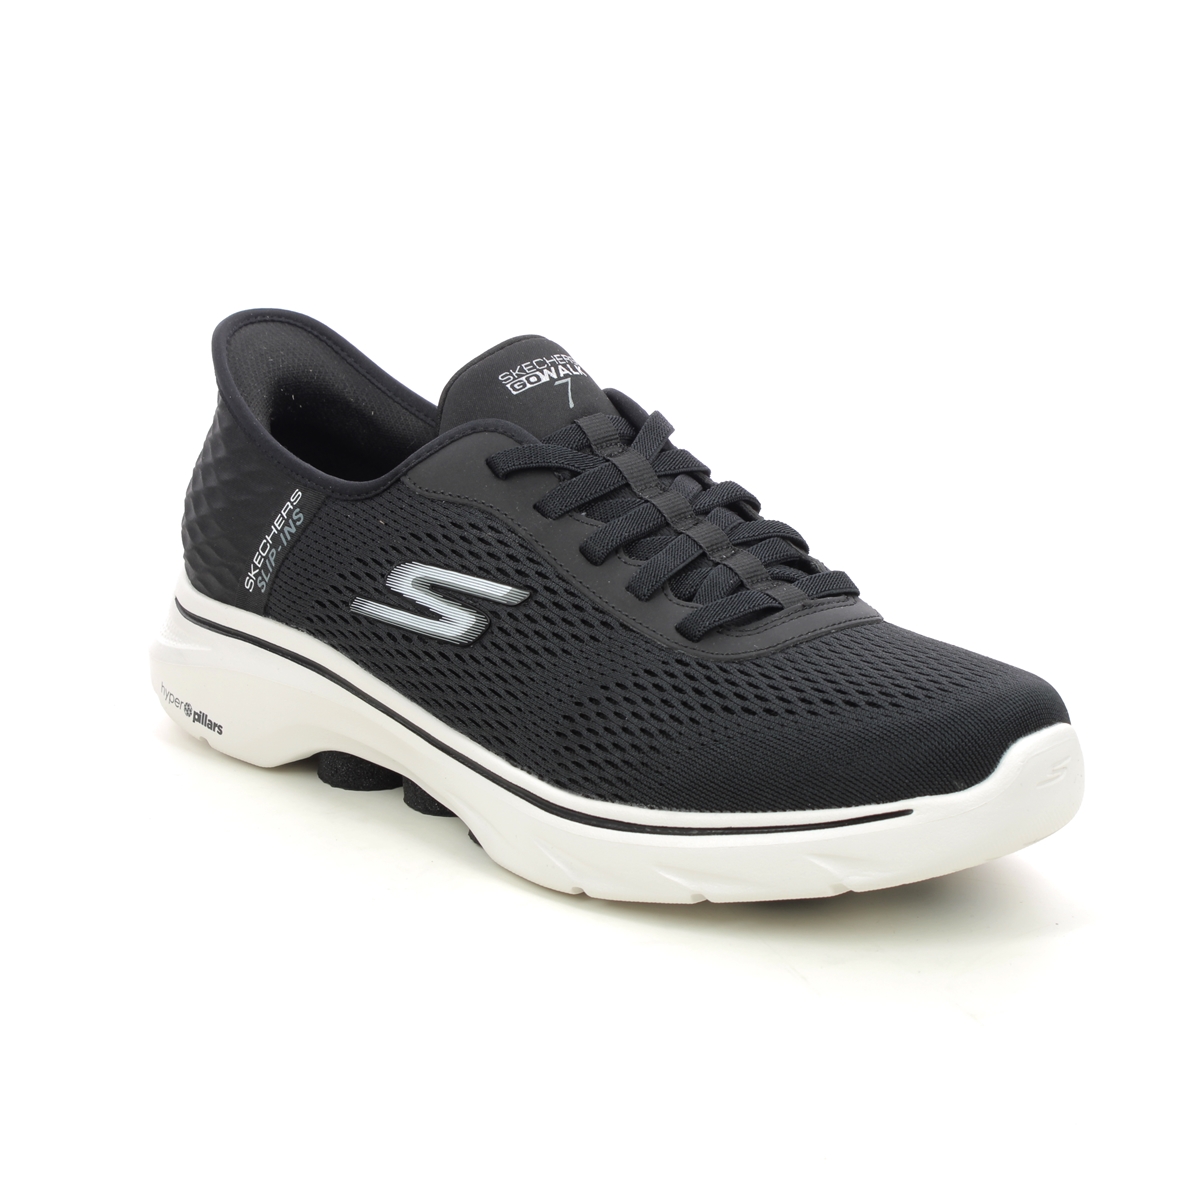 Skechers Slip Ins Go Walk 7 Bungee BKW Black white Mens trainers 216648 in a Plain Textile in Size 9.5